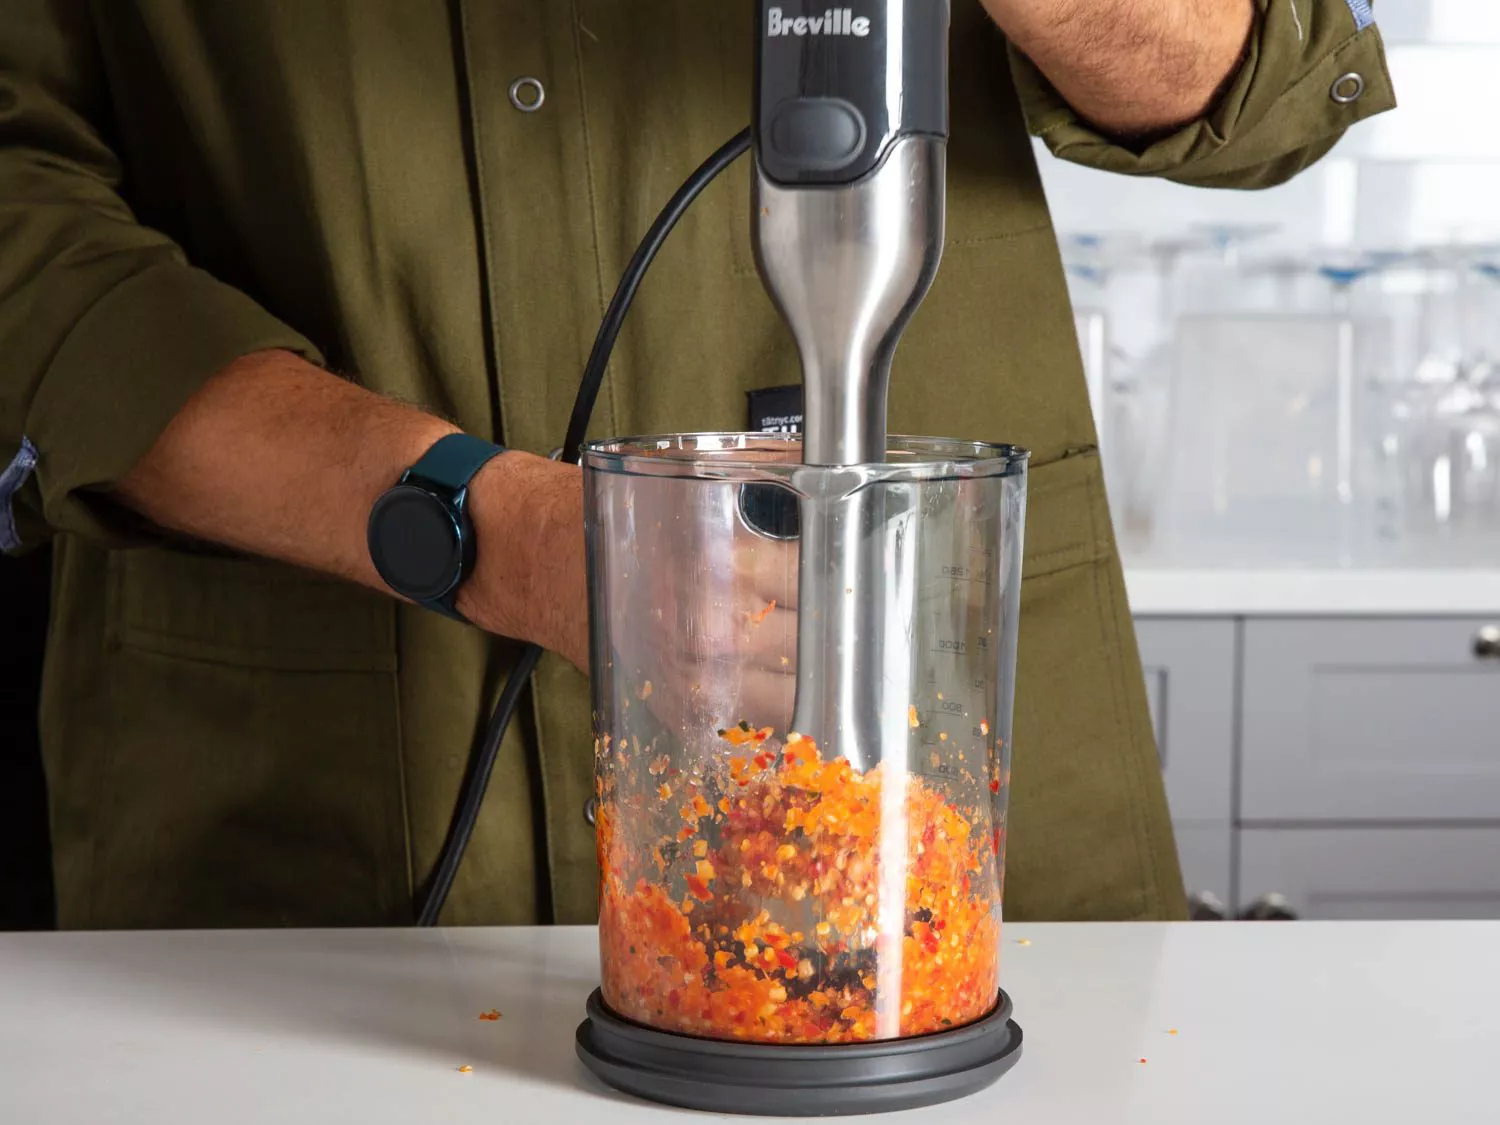 How to use an immersion blender